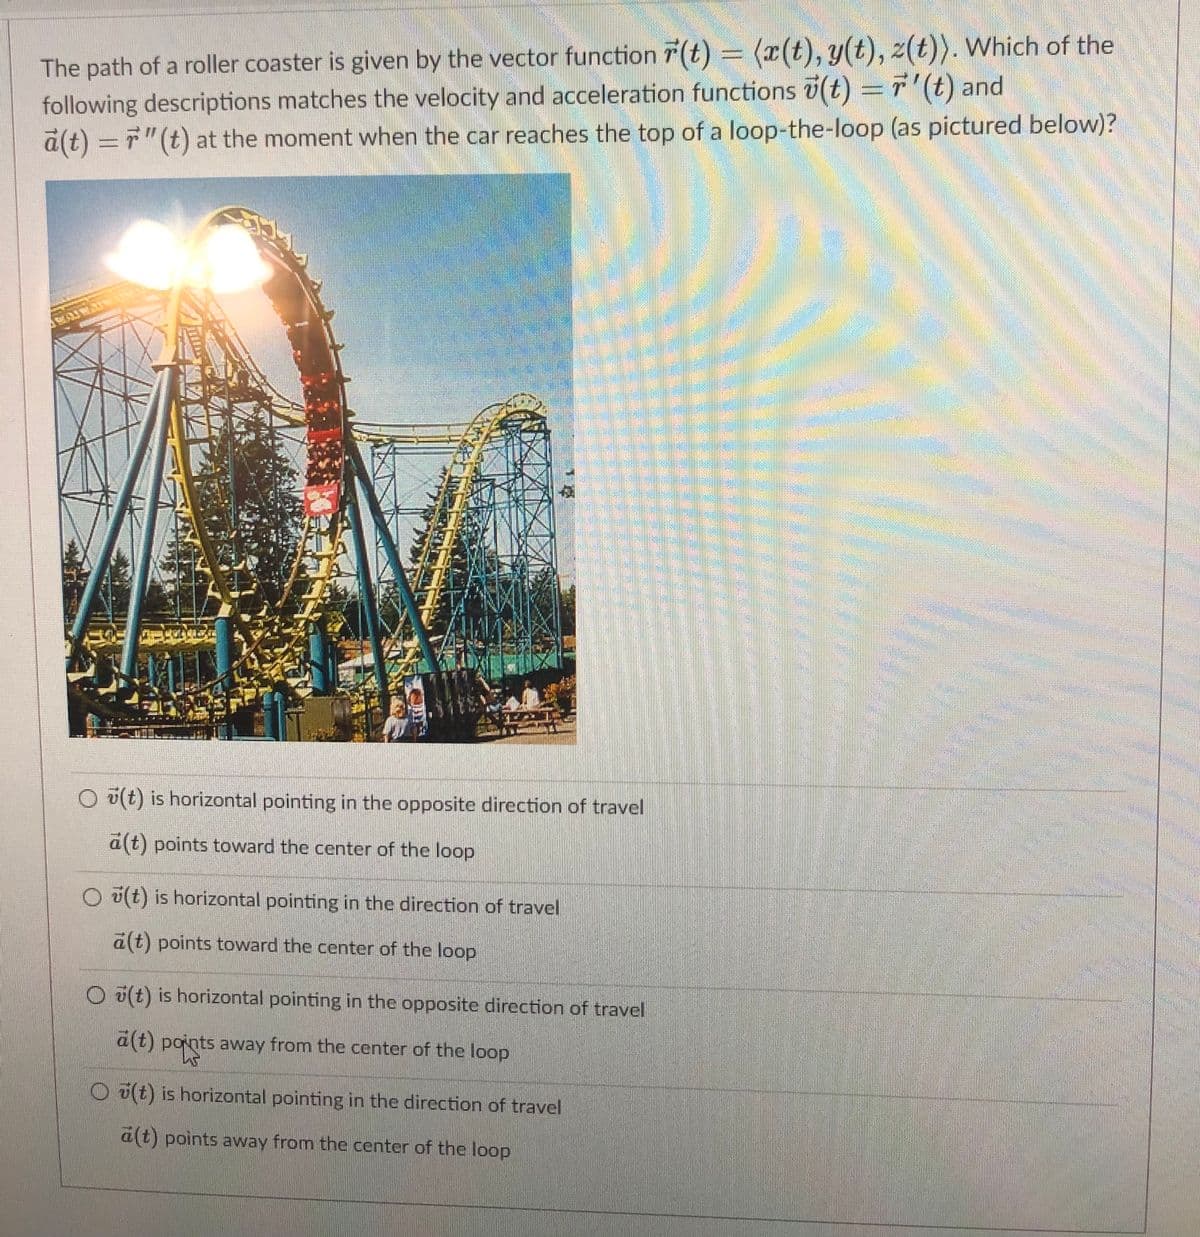 The path of a roller coaster is given by the vector function T (t) = (x(t), y(t), z(t)). Which of the
following descriptions matches the velocity and acceleration functions i(t) =7'(t) and
a(t) ="(t) at the moment when the car reaches the top of a loop-the-loop (as pictured below)?
O u(t) is horizontal pointing in the opposite direction of travel
a(t) points toward the center of the loop
O u(t) is horizontal pointing in the direction of travel
a(t) points toward the center of the loop
O (t) is horizontal pointing in the opposite direction of travel
a(t) points away from the center of the loop
O(t) is horizontal pointing in the direction of travel
a(t) points away from the center of the loop
